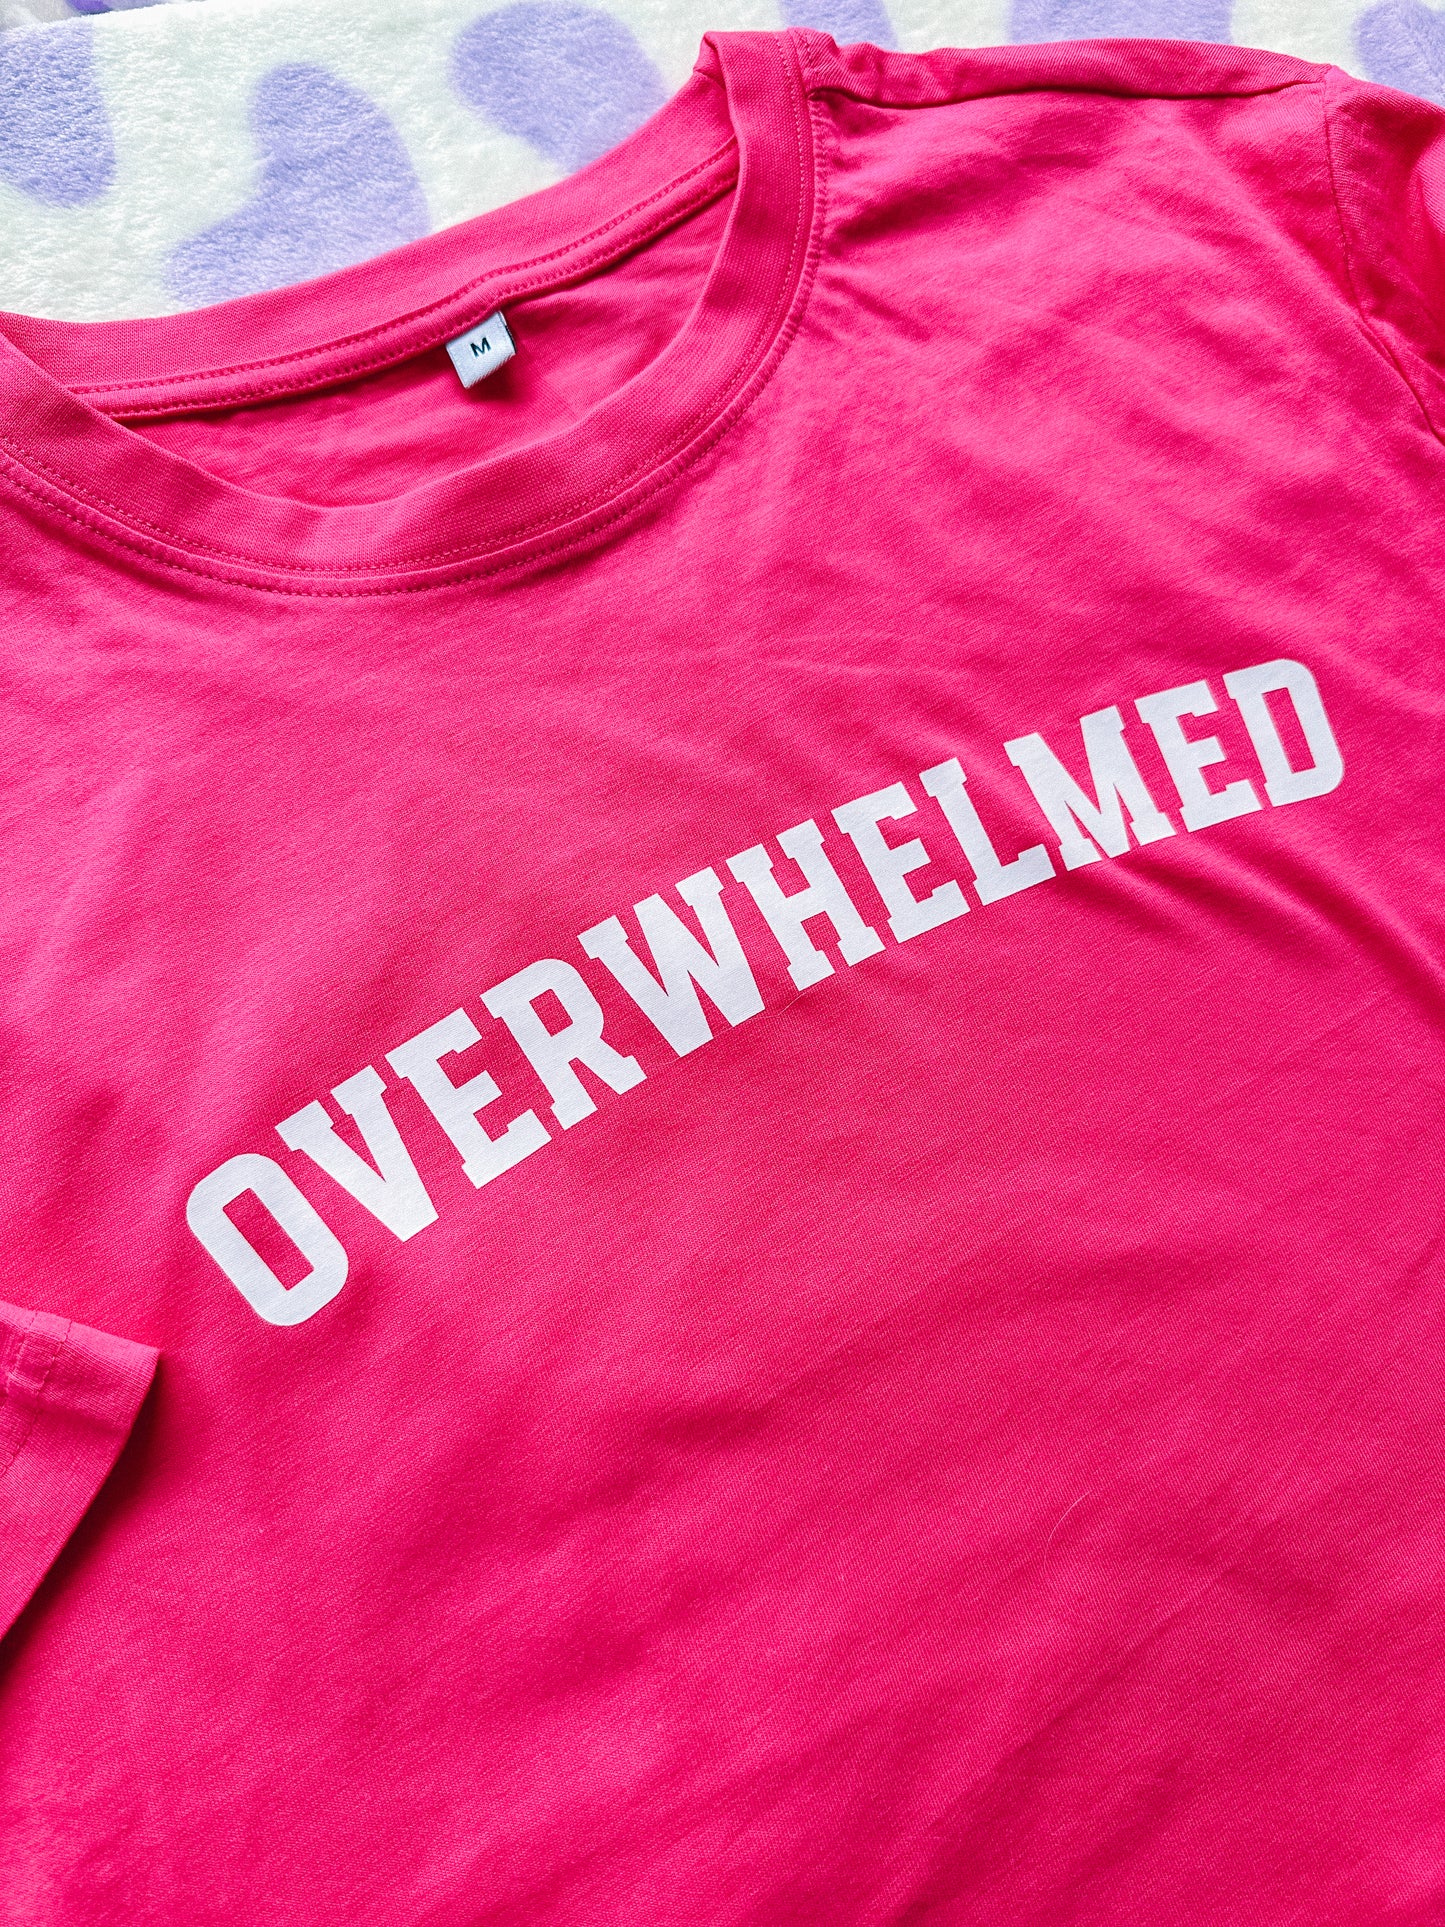 Overwhelmed printed cropped oversized tee